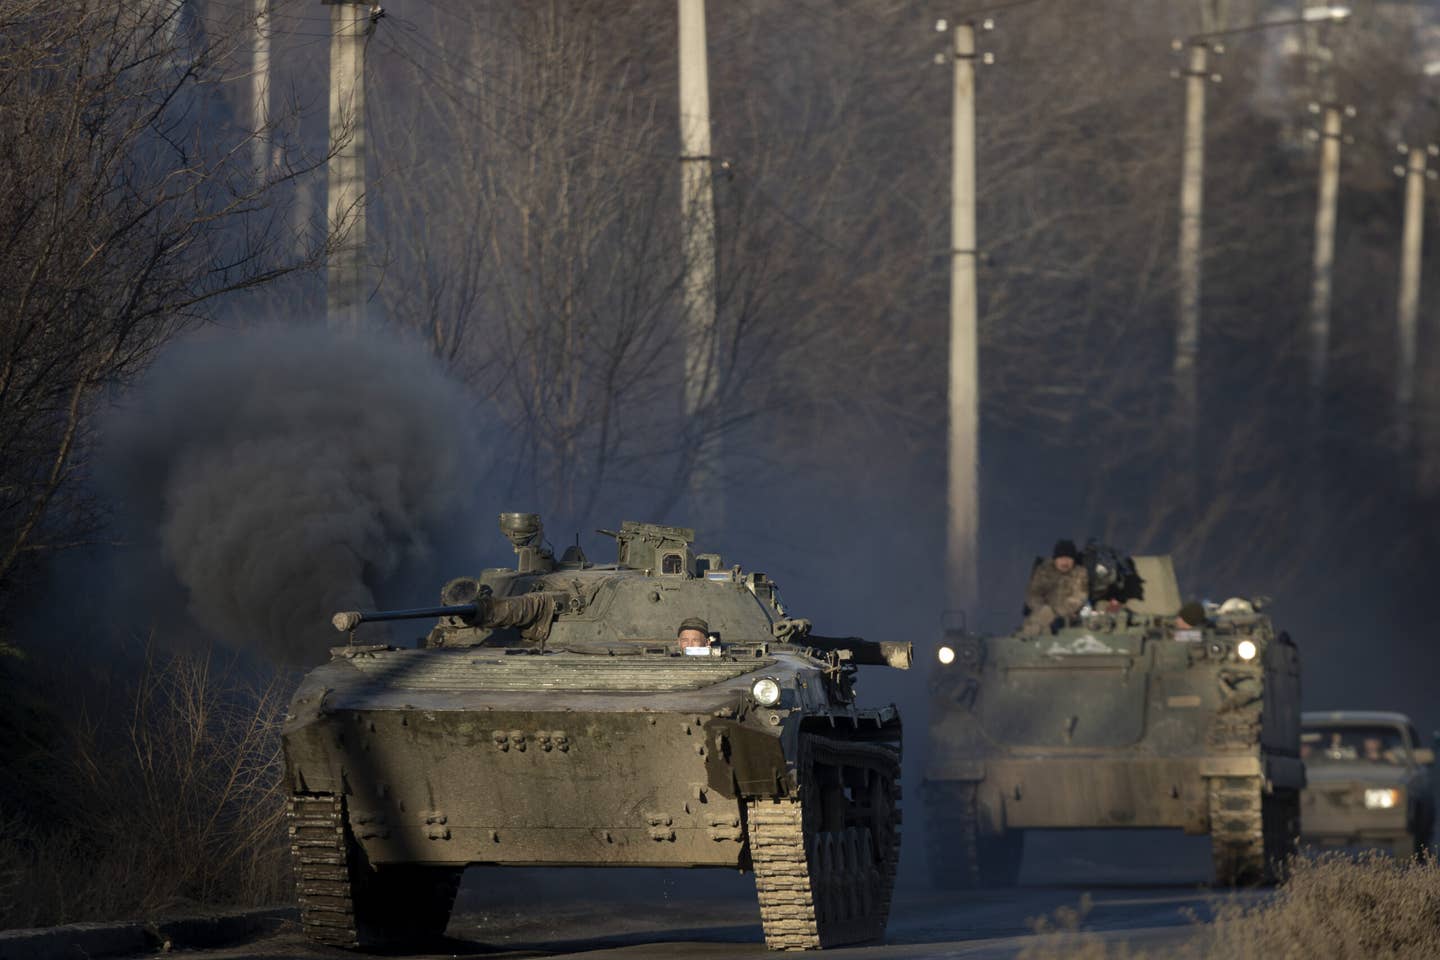 Ukrainian soldiers on their way to the frontlines. (Photo by Mustafa Ciftci/Anadolu Agency via Getty Images)